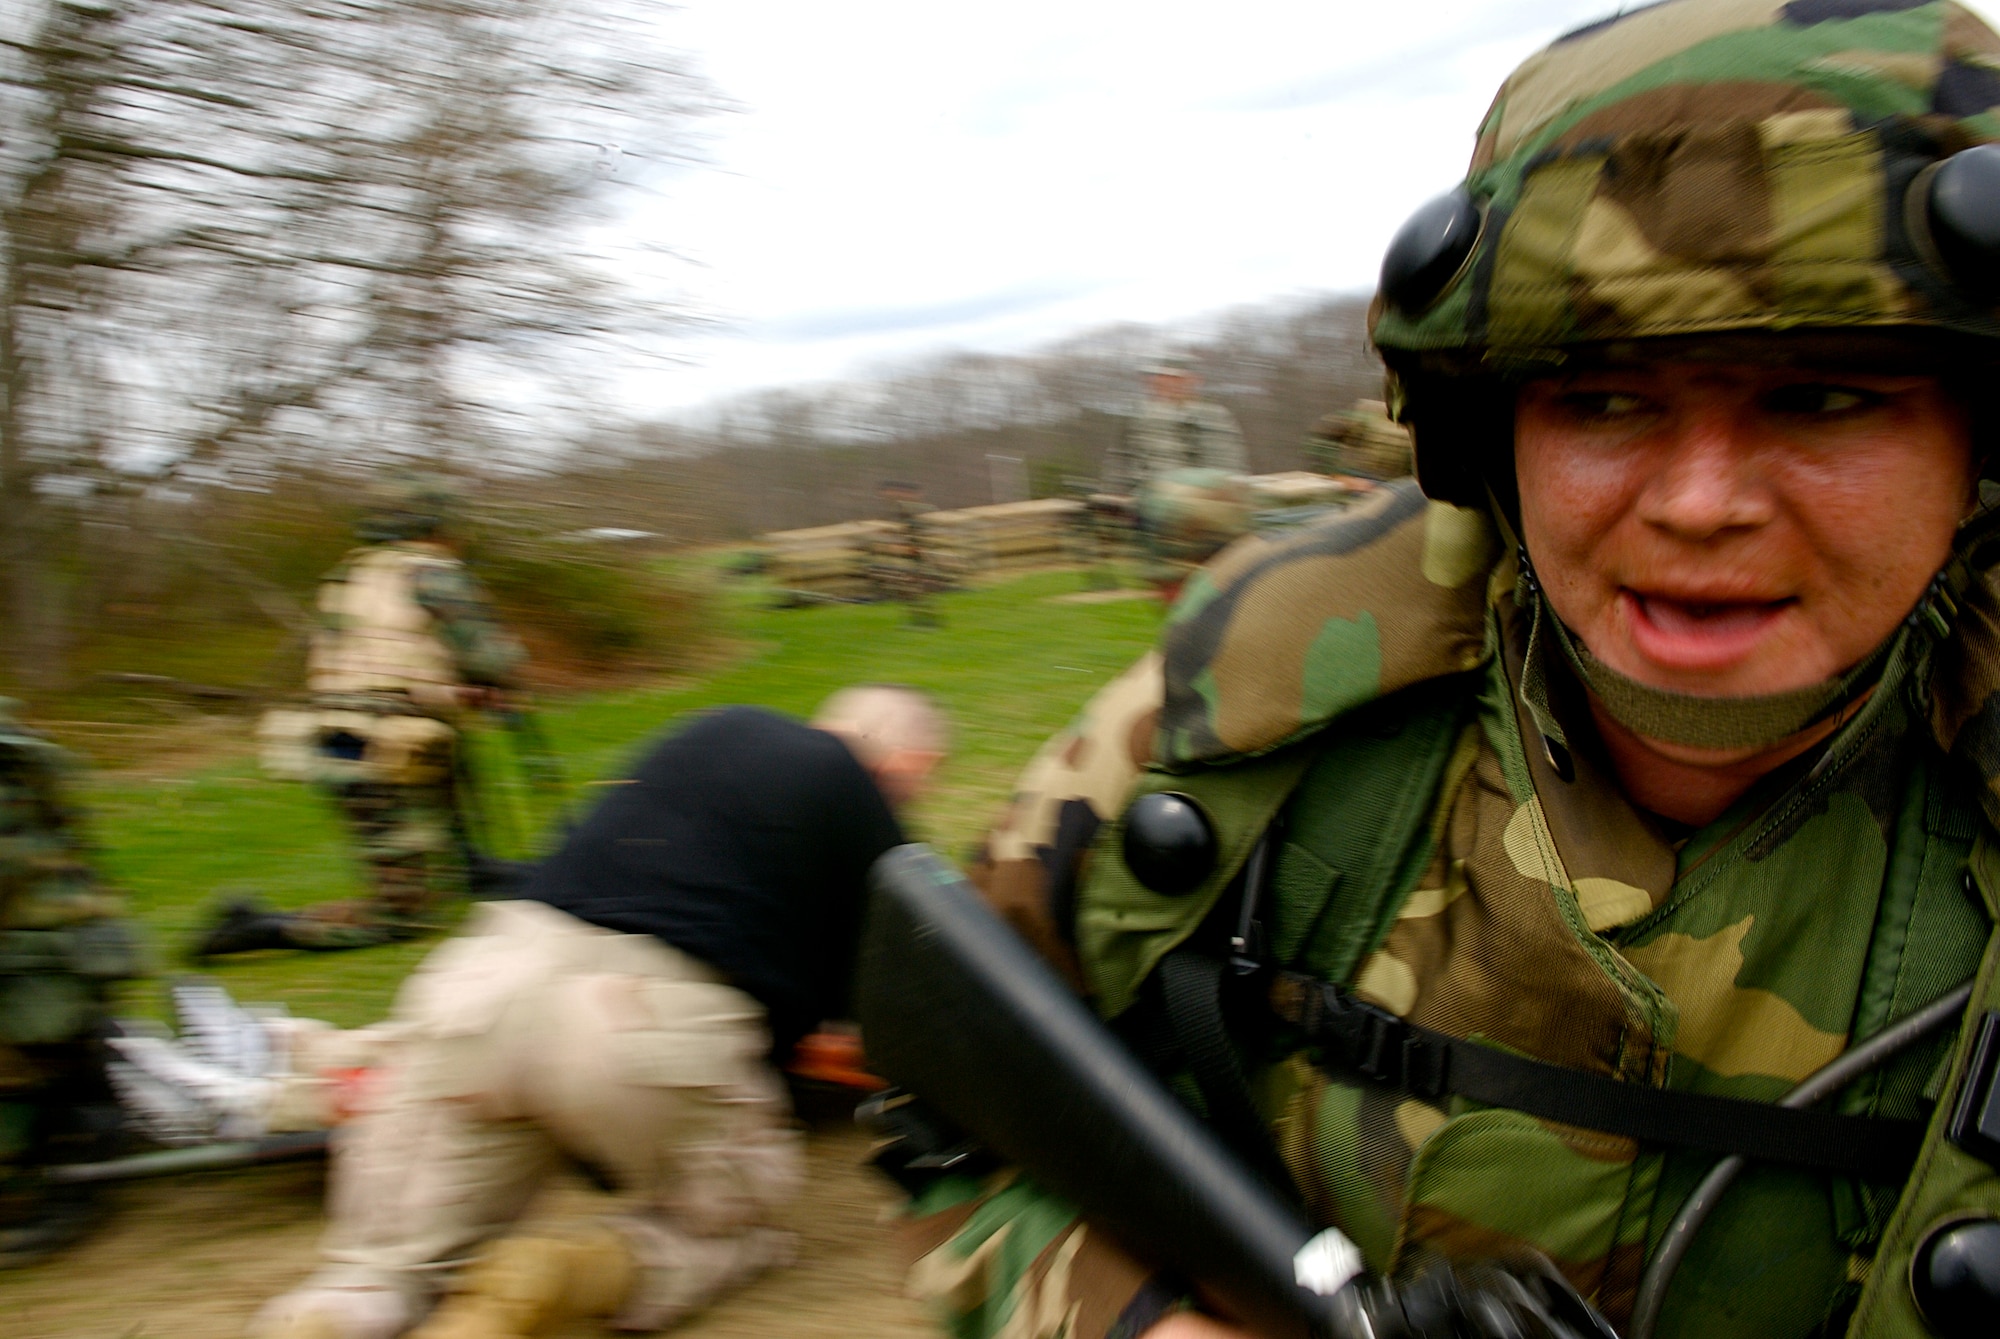 Firt Lt. Randi Norton, a student in Advanced Contingency Skills Training Course 08-4, provides security while fellow classmates attempt to carry  simulated wounded patients to a safe area during the combat first aid portion of the ACST course on a Fort Dix, N.J., range April 11, 2008. The course is taught by the U.S. Air Force Expeditionary Center's 421st Combat Training Squadron and prepares Airmen for upcoming deployments. (U.S. Air Force Photo/Staff Sgt. Samuel Rogers)